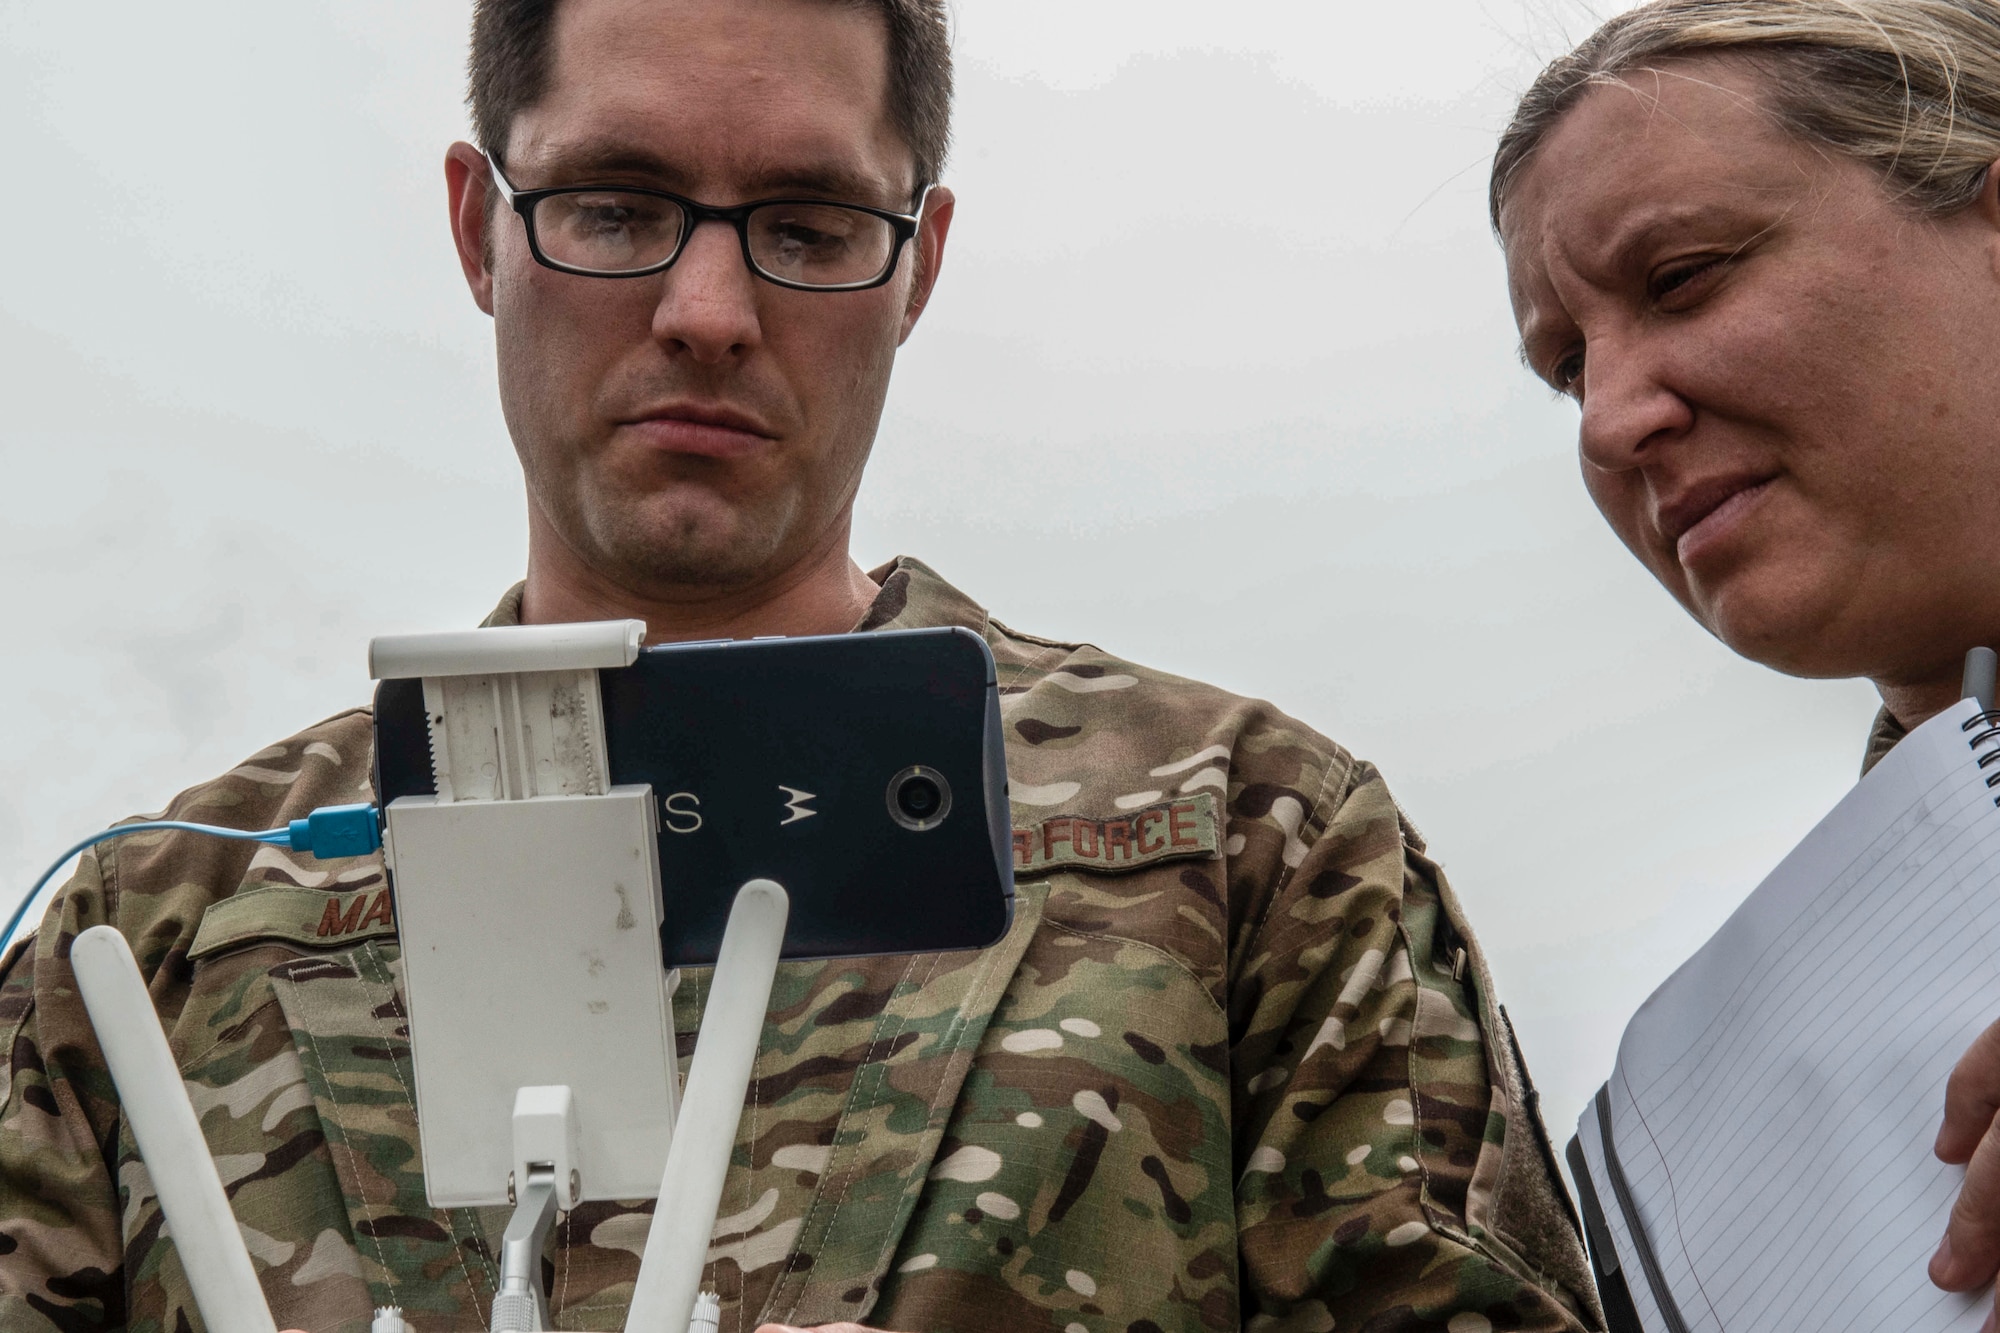 U.S. Air Force Master Sgt. Nathaniel May, 9th Intelligence Squadron operations superintendent, looks on the Hivemapper drone screen with Master Sgt. Ajenna Smith, 9th Security Forces Squadron innovations superintendent, at Beale Air Force Base, California,  April 12, 2019. The Hivemapper program is a three-dimensional drone asset can map infrastructure, while providing visualization and analytic tools. (U.S. Air Force photo by Tech. Sgt. Veronica Montes)